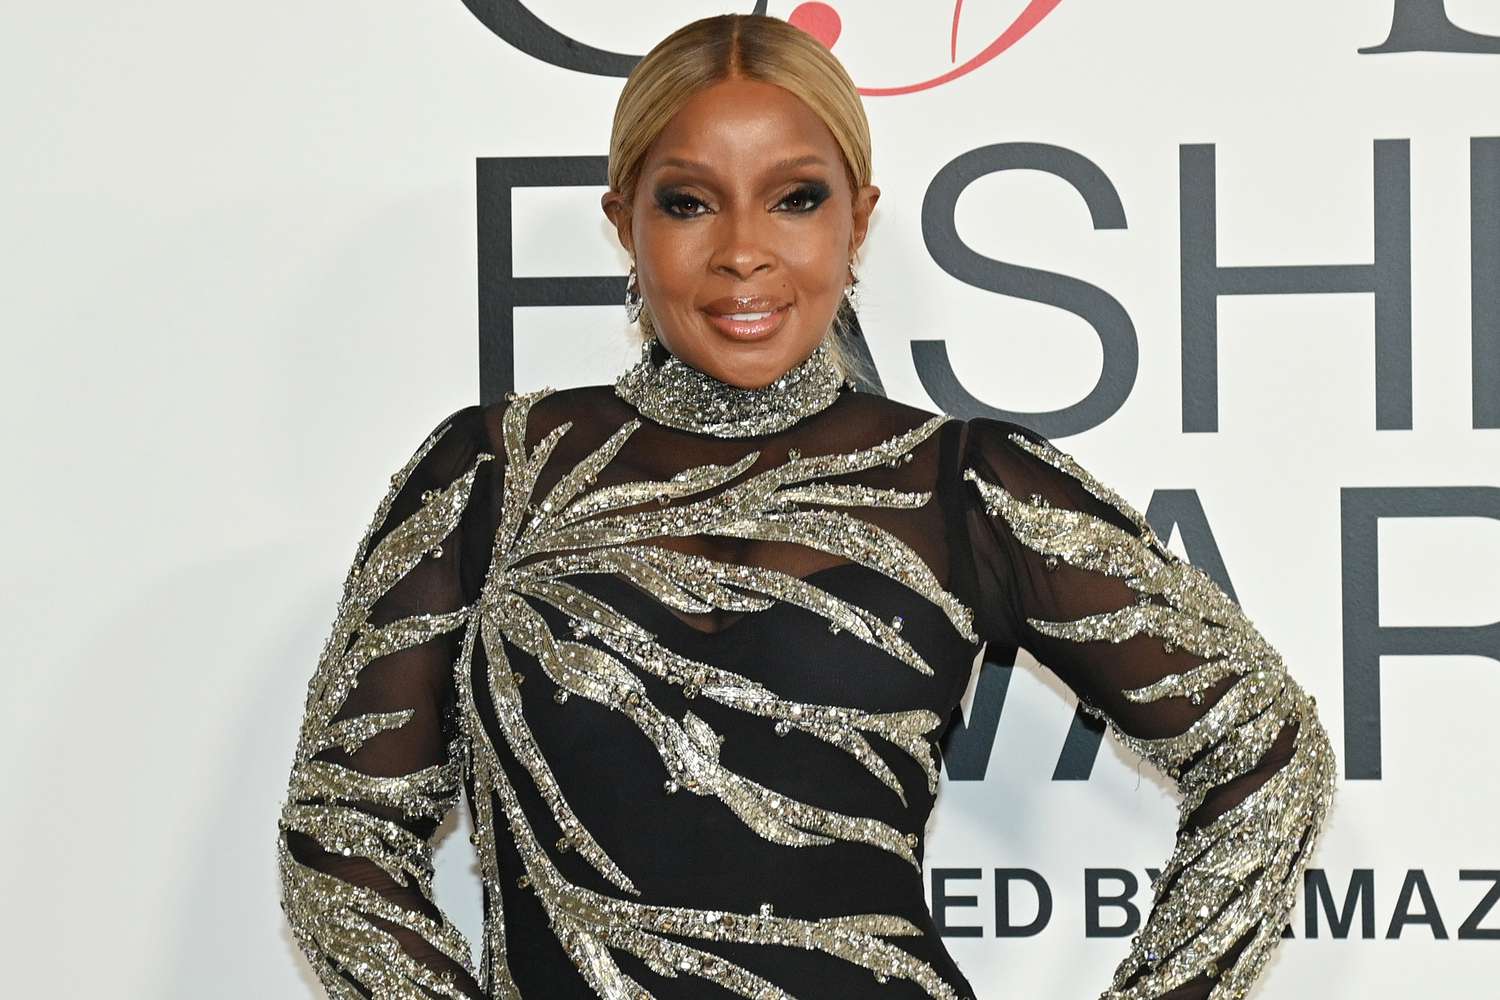 Mary J. Blige Says She's Going to Retire from Music in '5 or 6 Years'